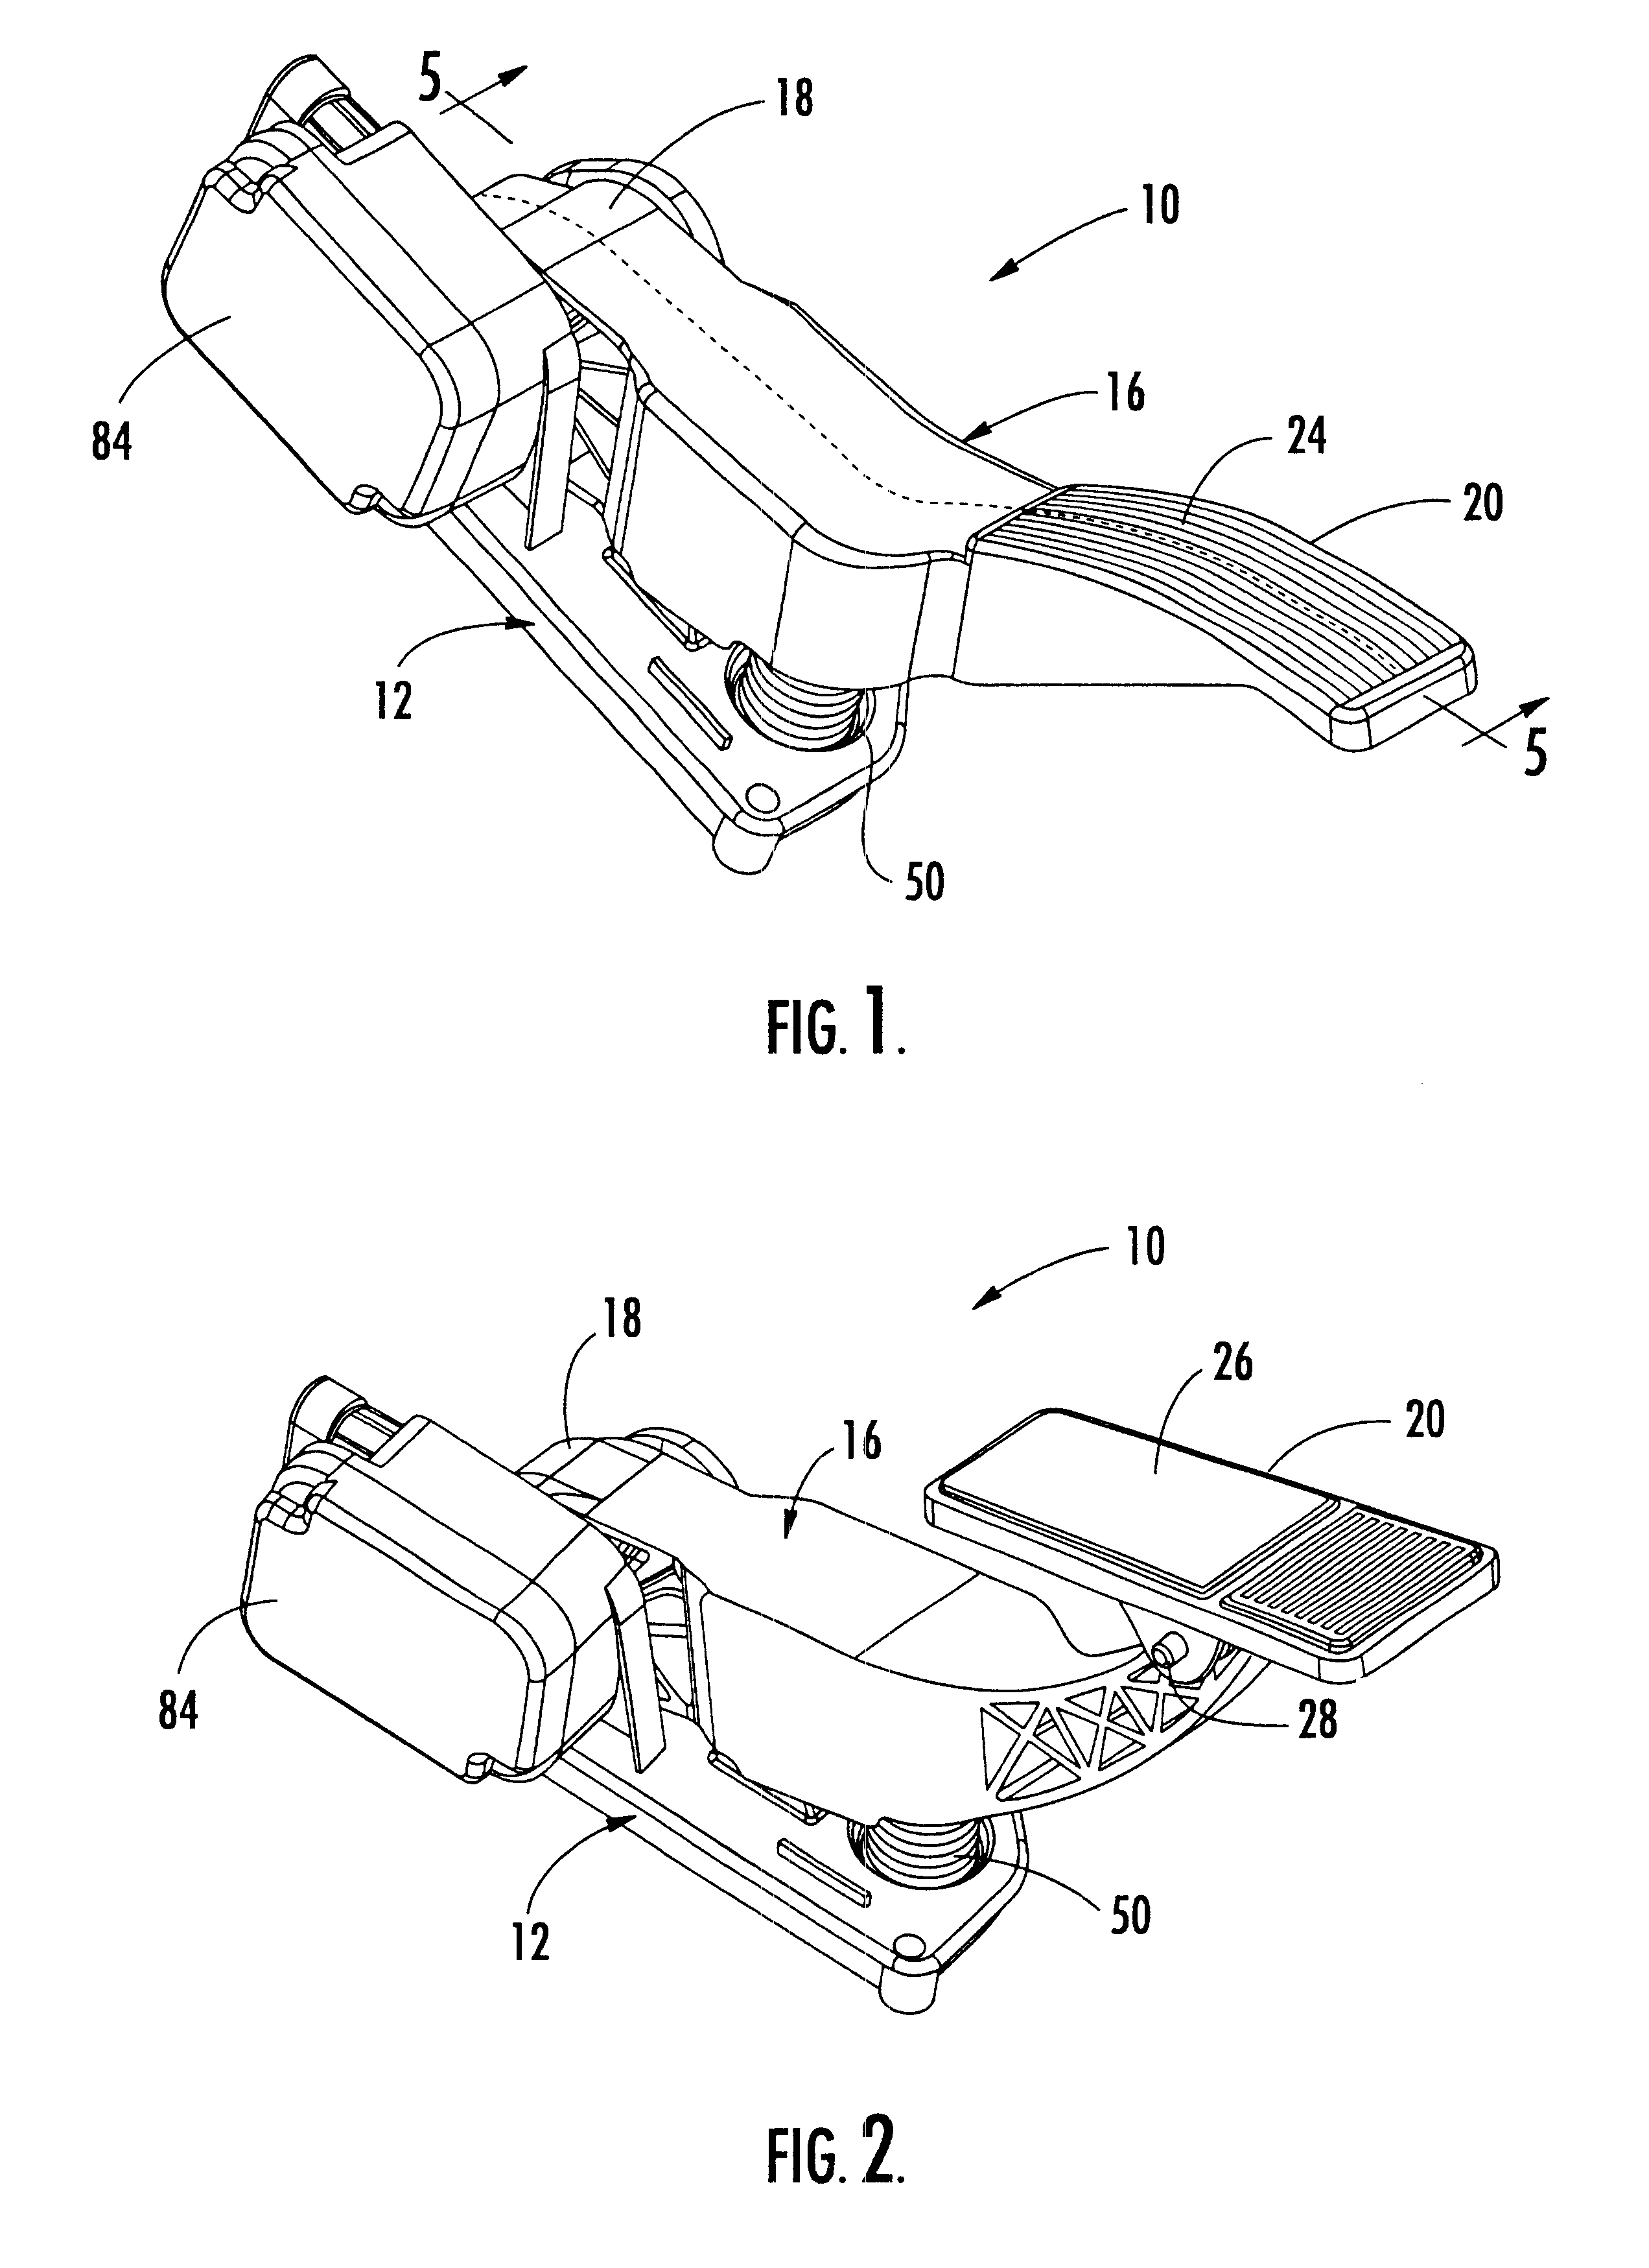 Electronic pedal assembly and method for providing a tuneable hystersis force